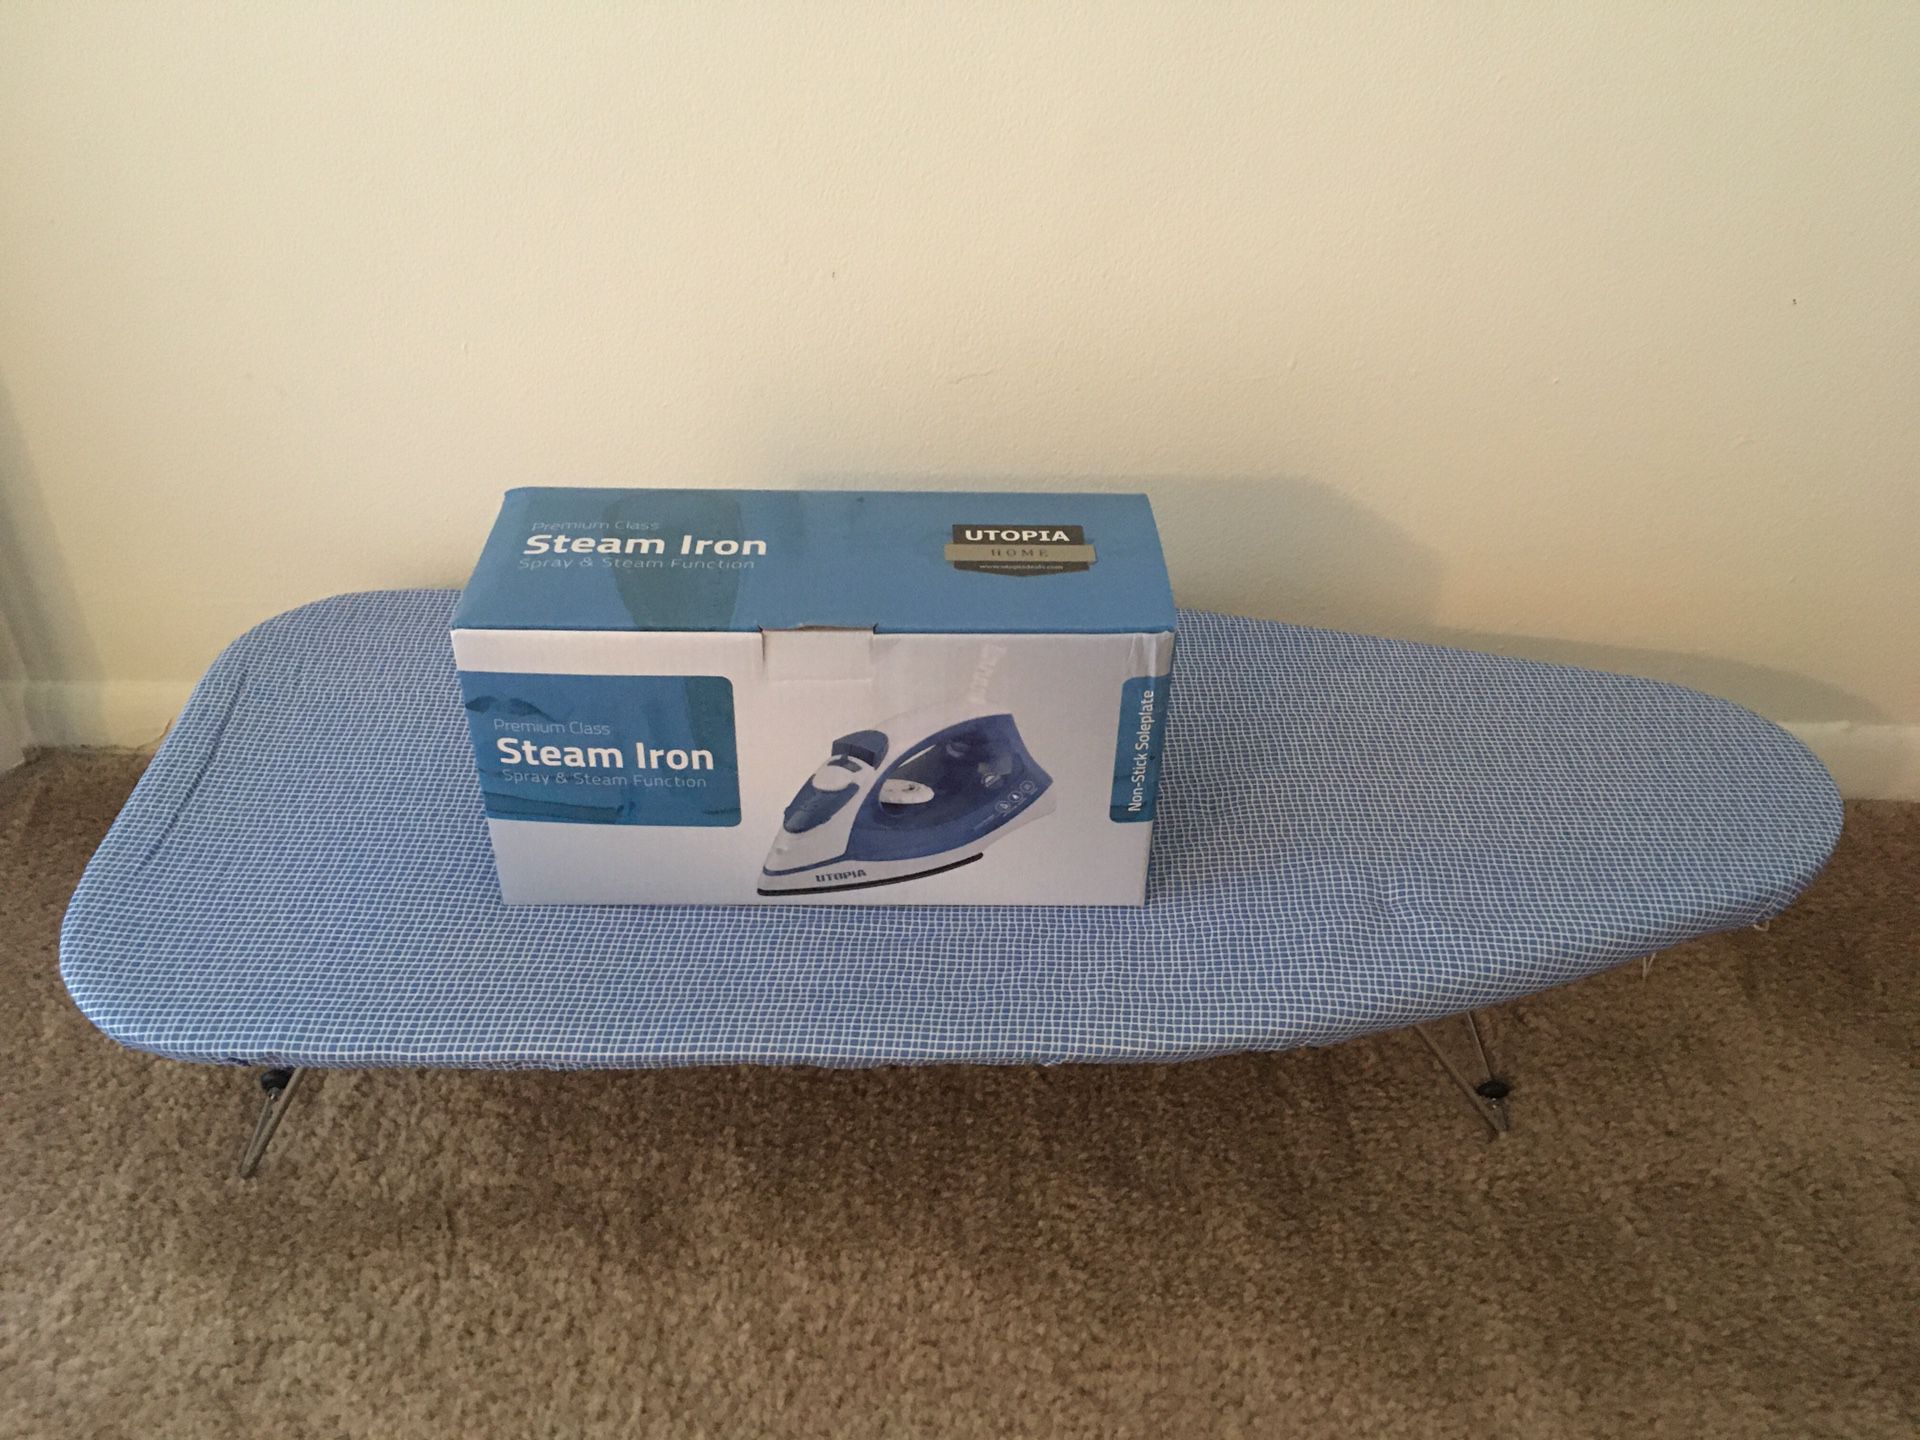 Steam Iron and Portable Ironing Board